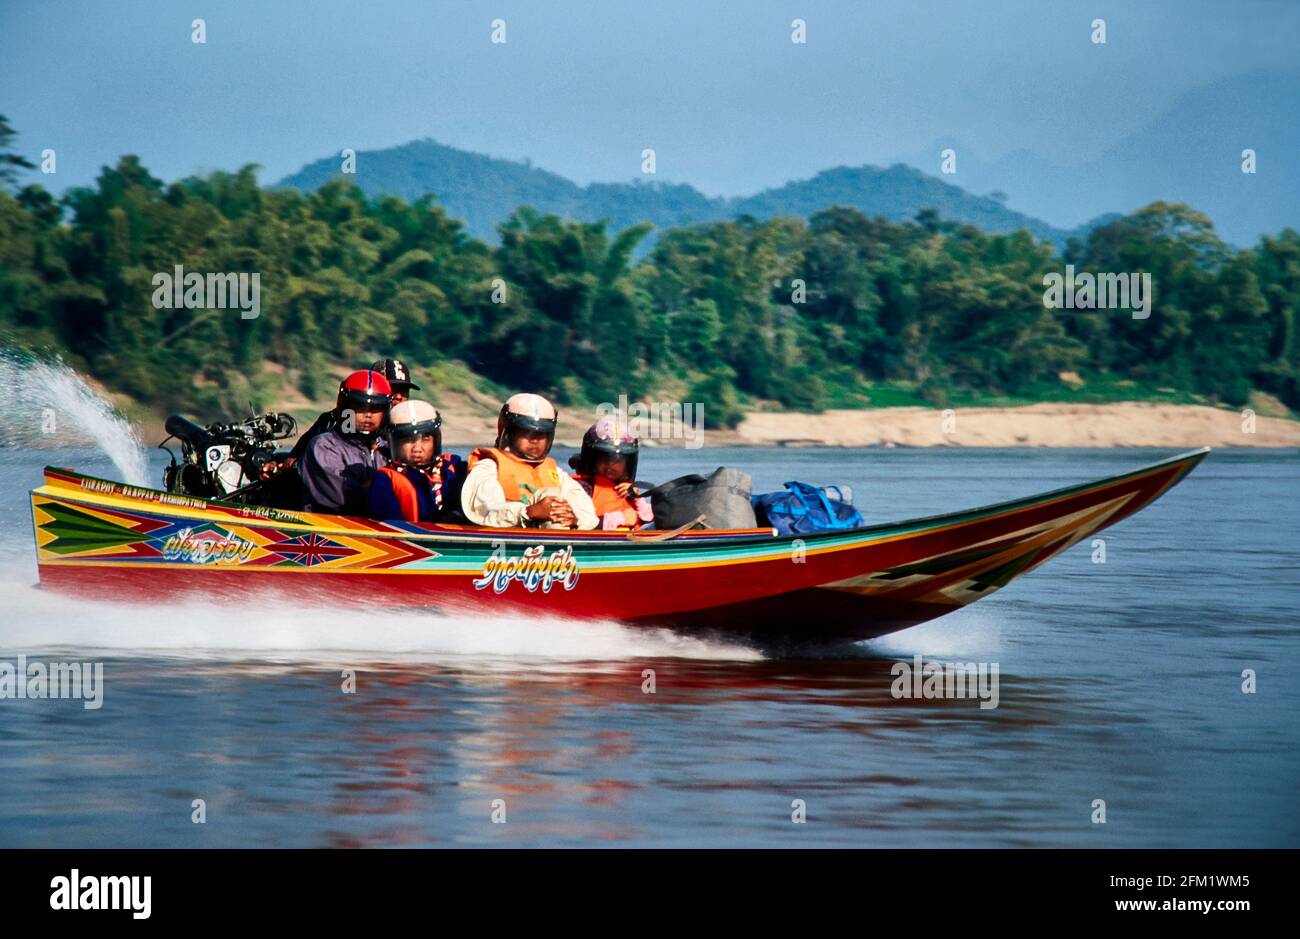 Who is in a hurry, or has enough money, travels by speedboat. Because of the high speed, helmets are mandatory. The fast travel, however, hits painful Stock Photo